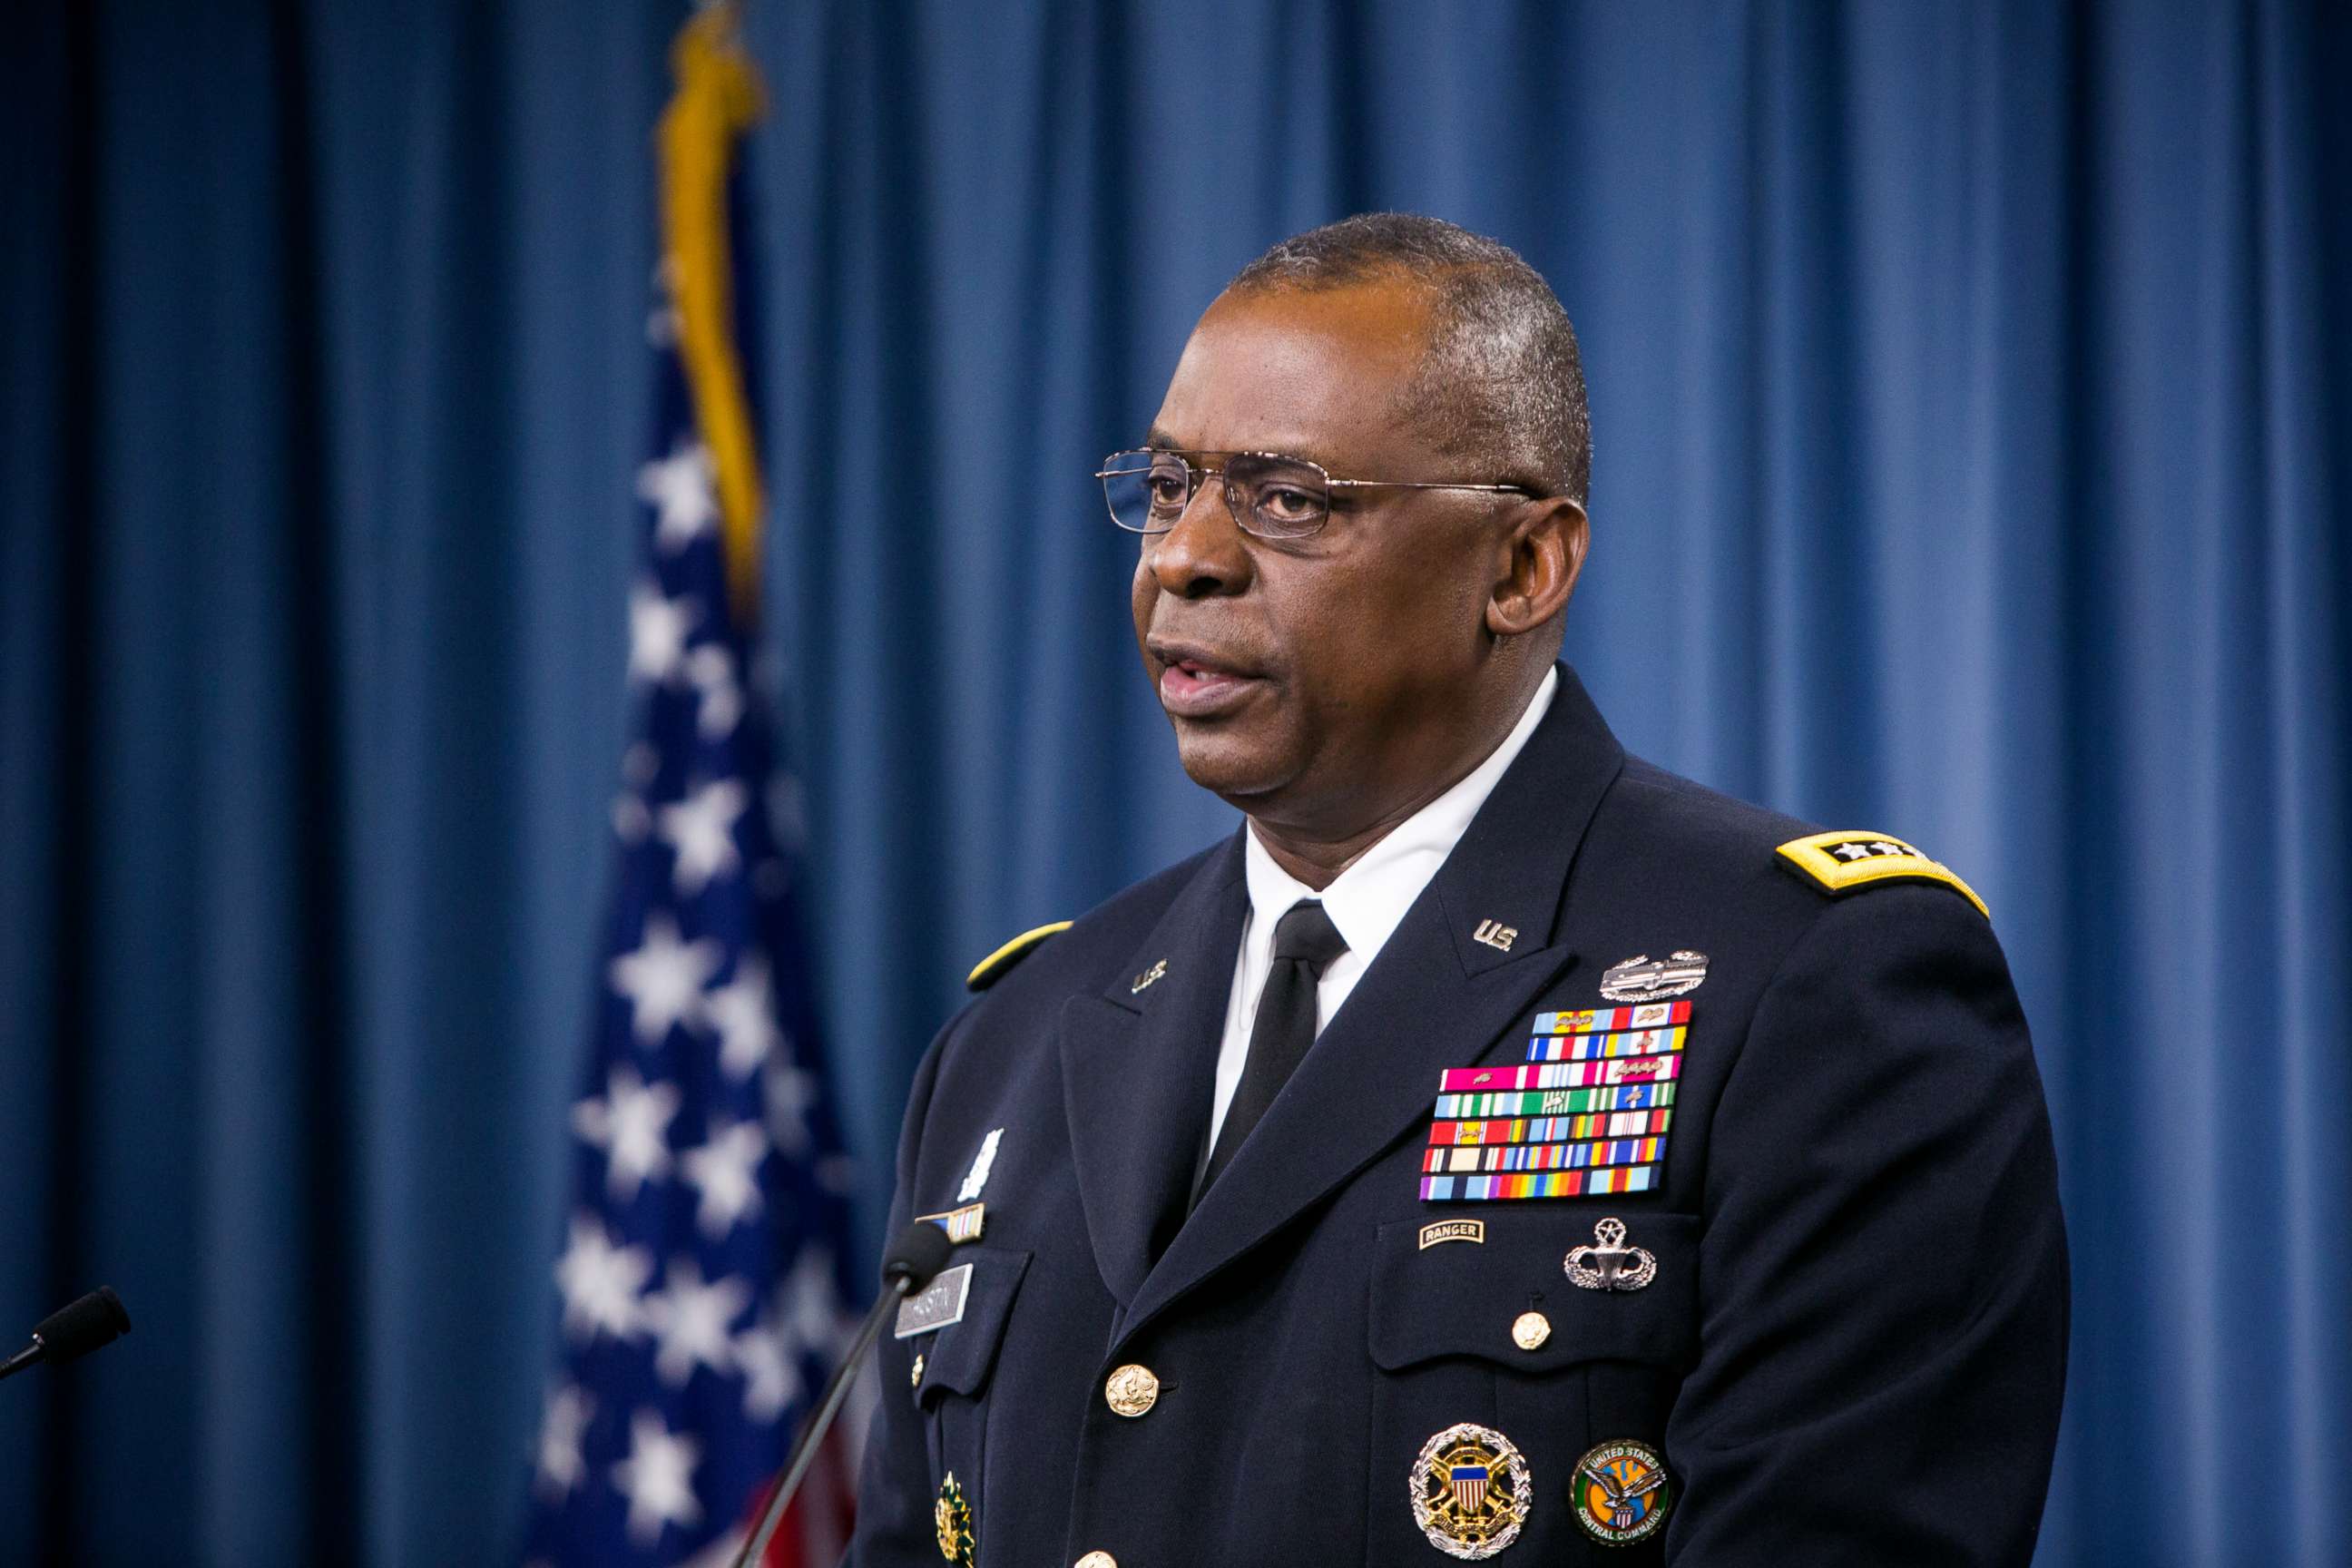 PHOTO: Commander of U.S. Central Command, Gen. Lloyd Austin II, holds a media briefing on Operation Inherent Resolve, the international military effort against ISIS, Oct. 17, 2014, at the Pentagon in Washington, D.C.